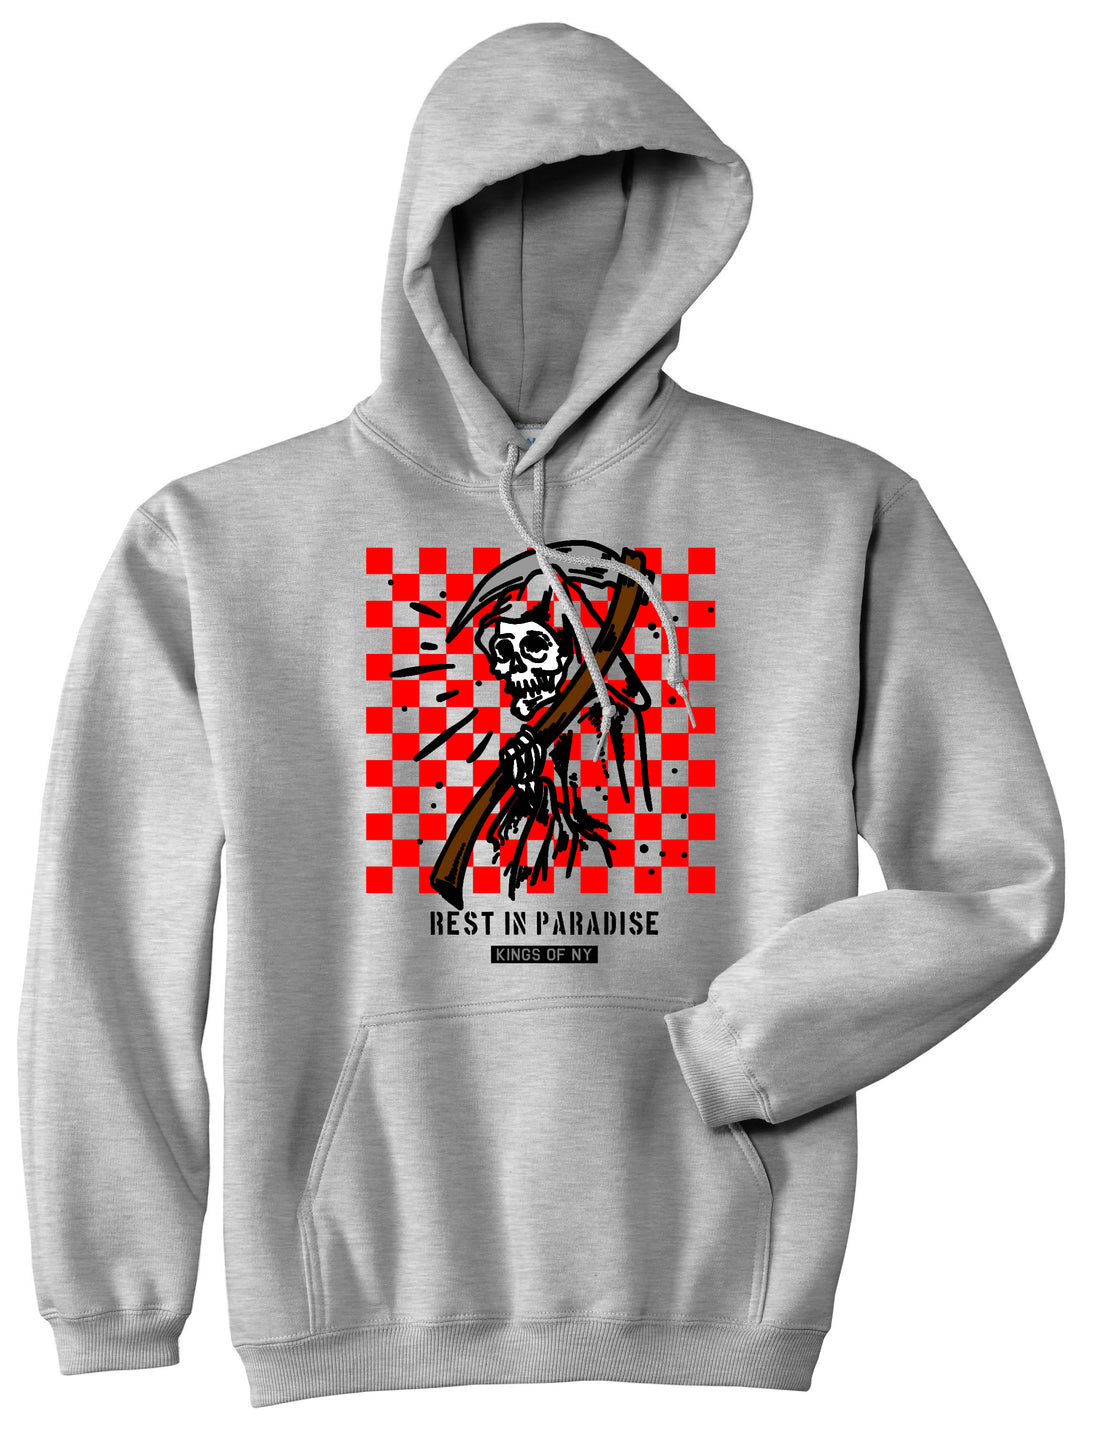 Rest In Paradise Grim Reaper Mens Pullover Hoodie Grey By Kings Of NY